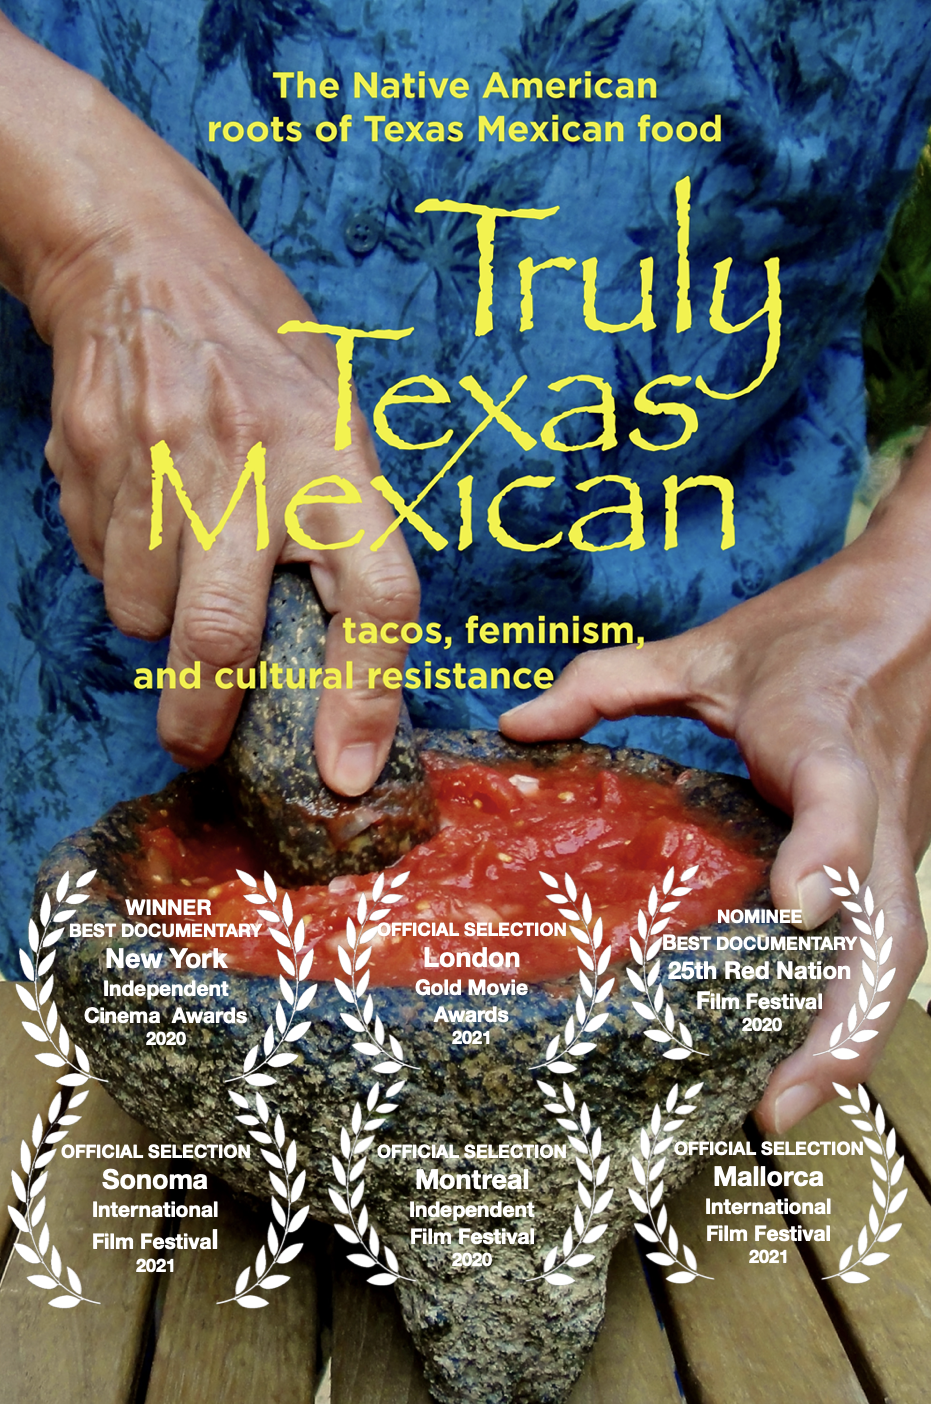 Aspen Film Partners with Voces Unidas de las Montañas to Present Live Panel Discussion on Documentary TRULY TEXAS MEXICAN